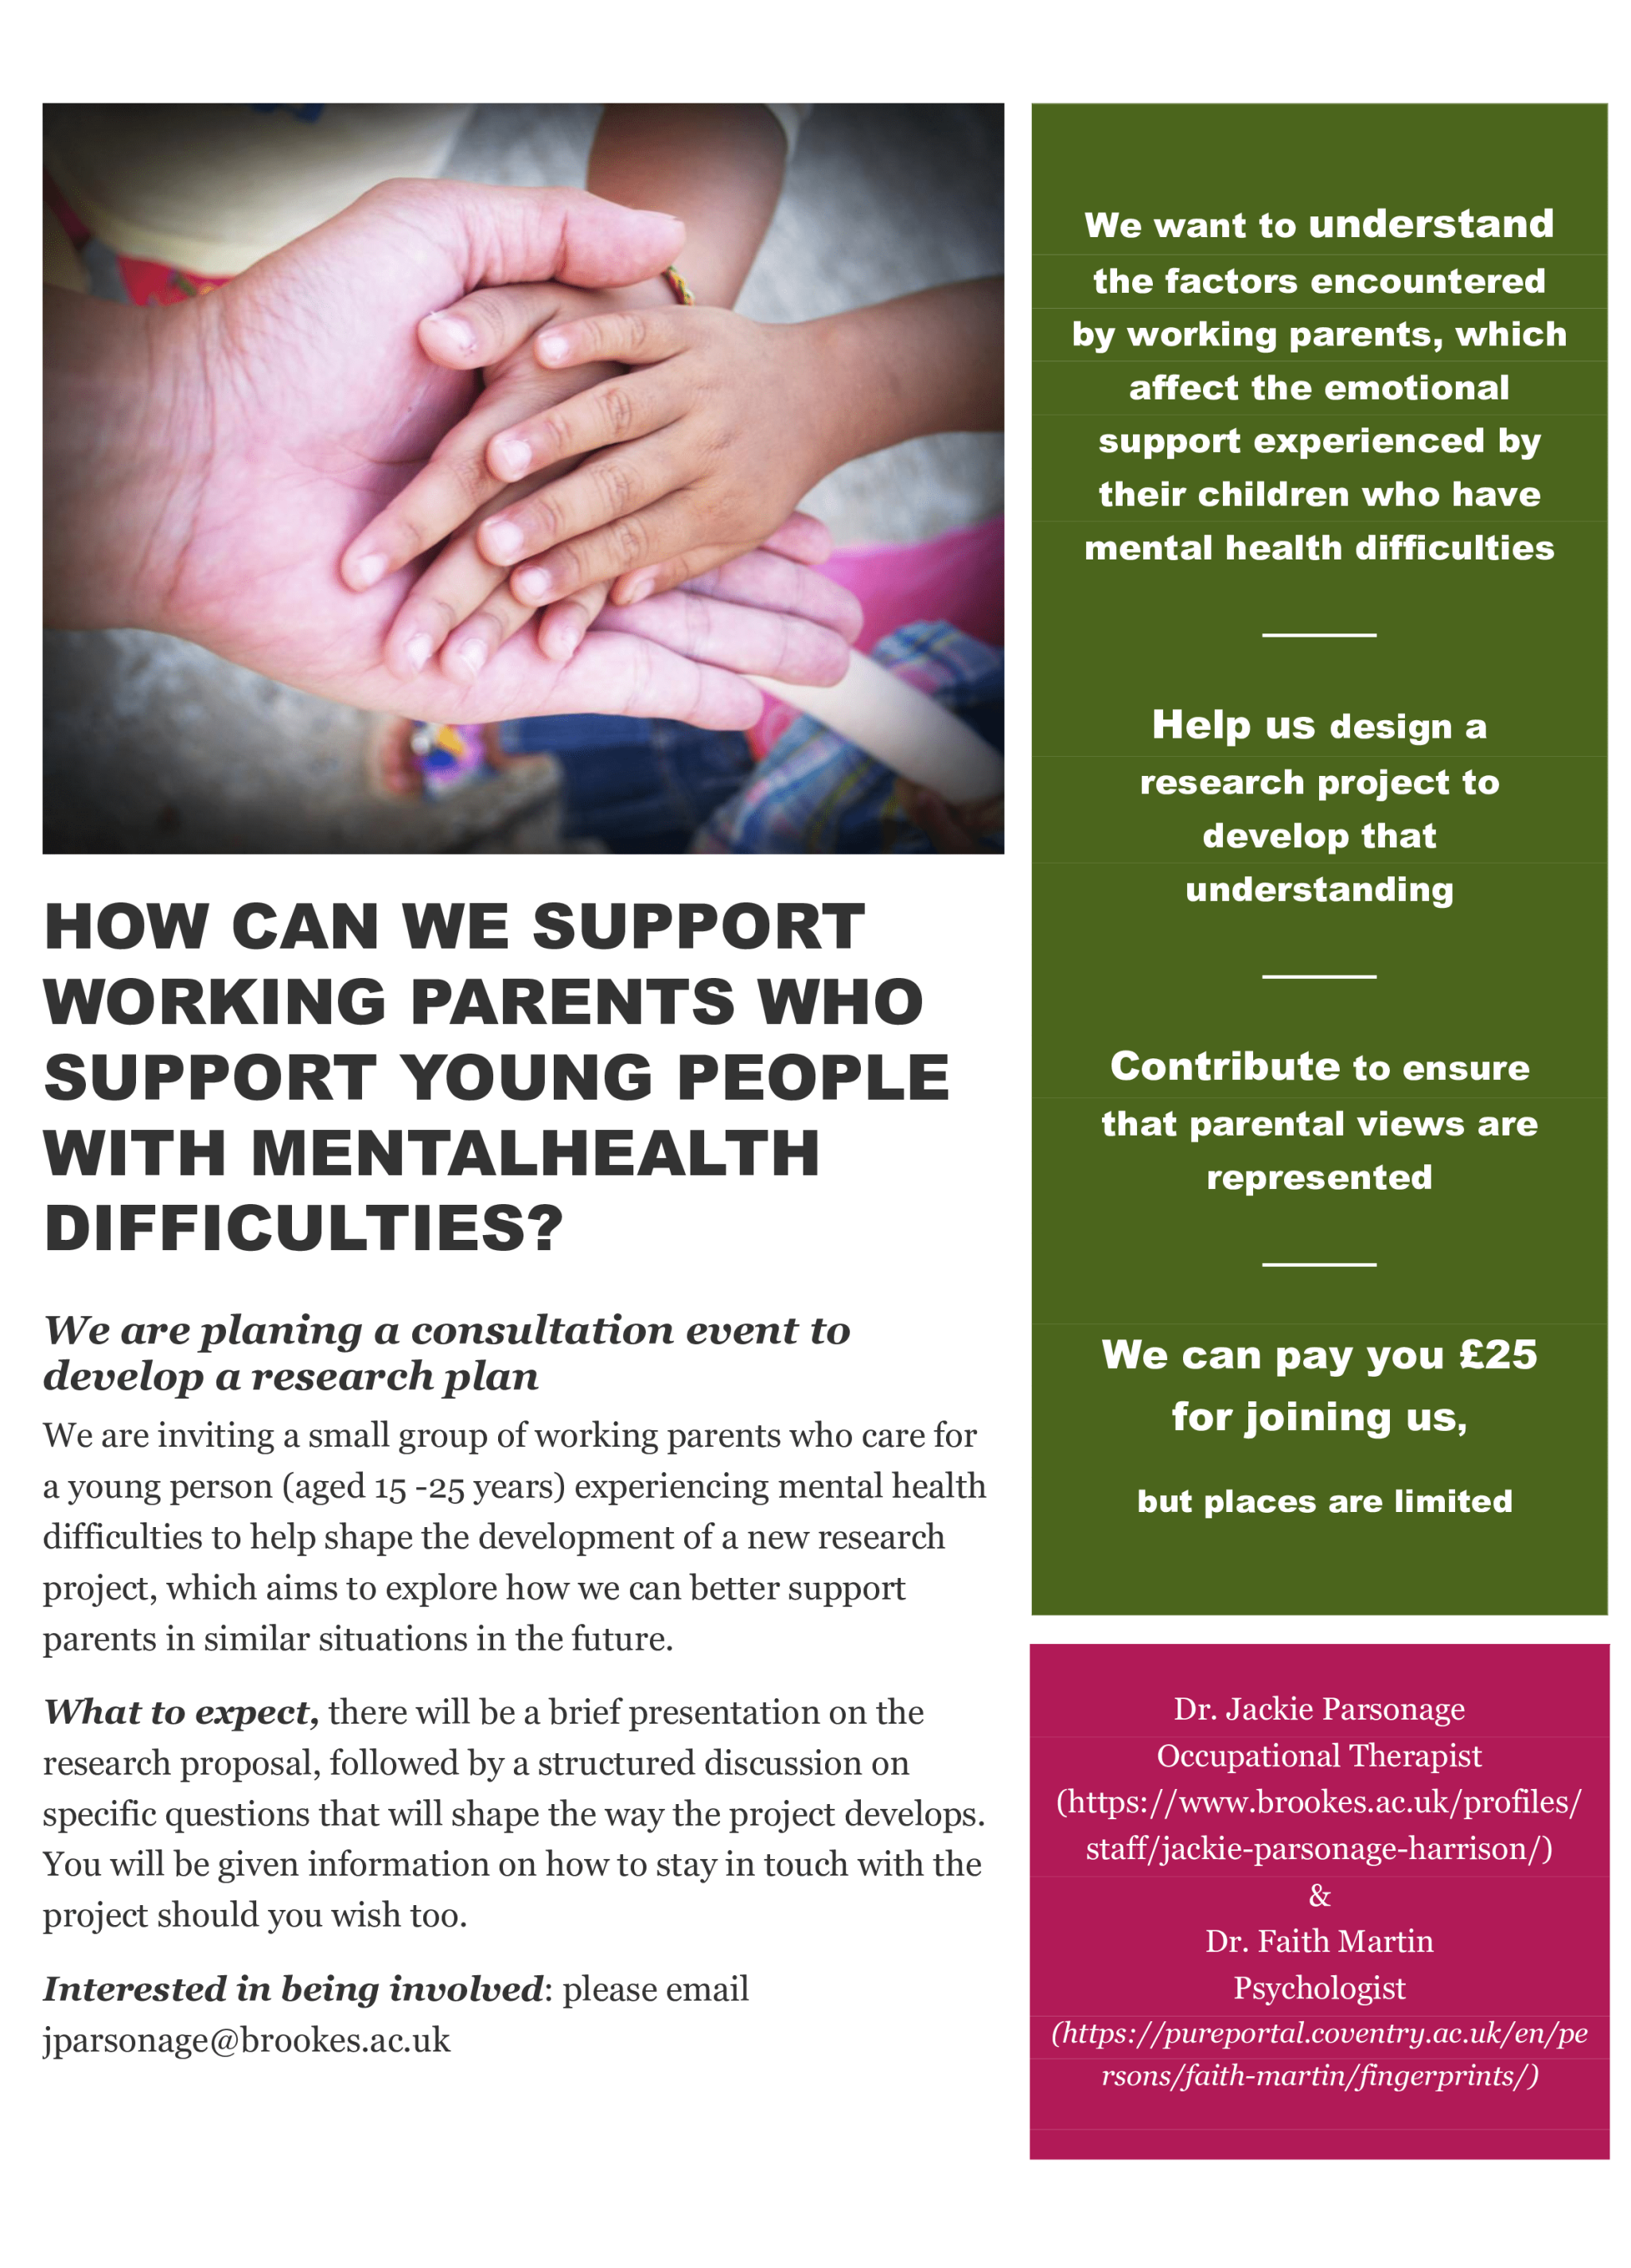 Supporting Working parents caring for young people expeirenicng mental health difficulties v2